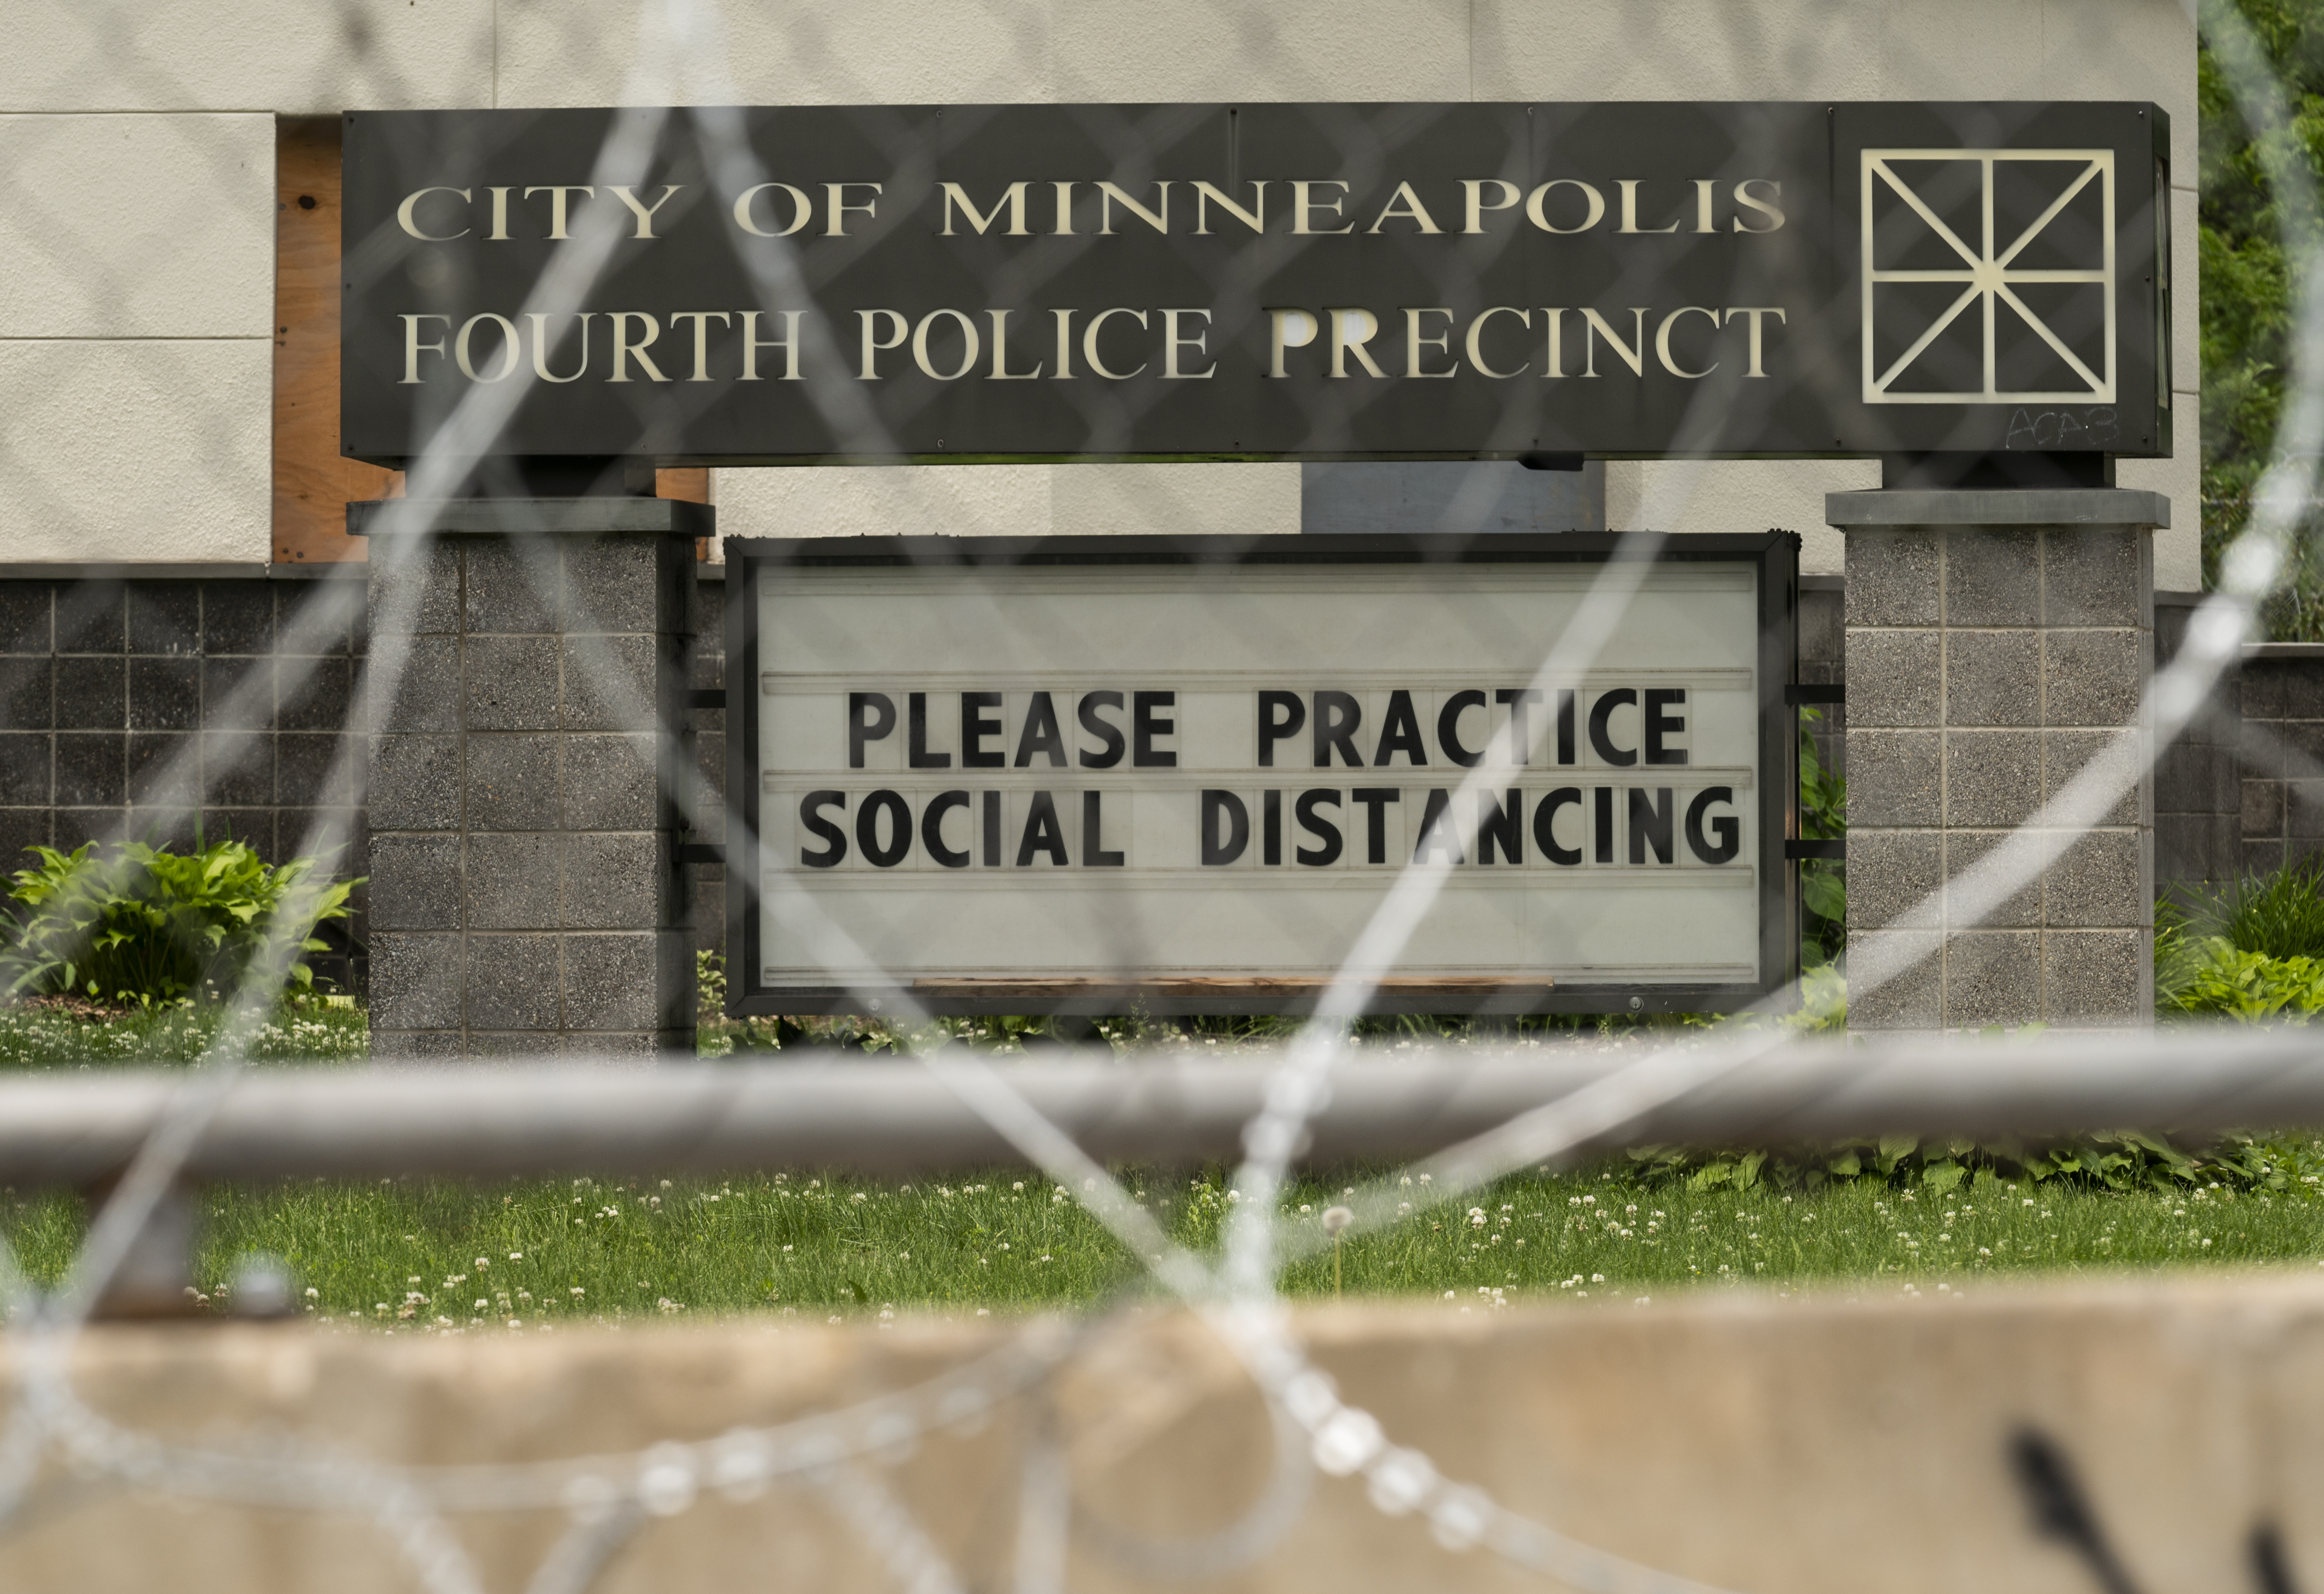 A general view outside the Fourth Precinct Police Station on June 9, 2020 in Minneapolis, Minnesota. (Photo by Stephen Maturen/Getty Images)